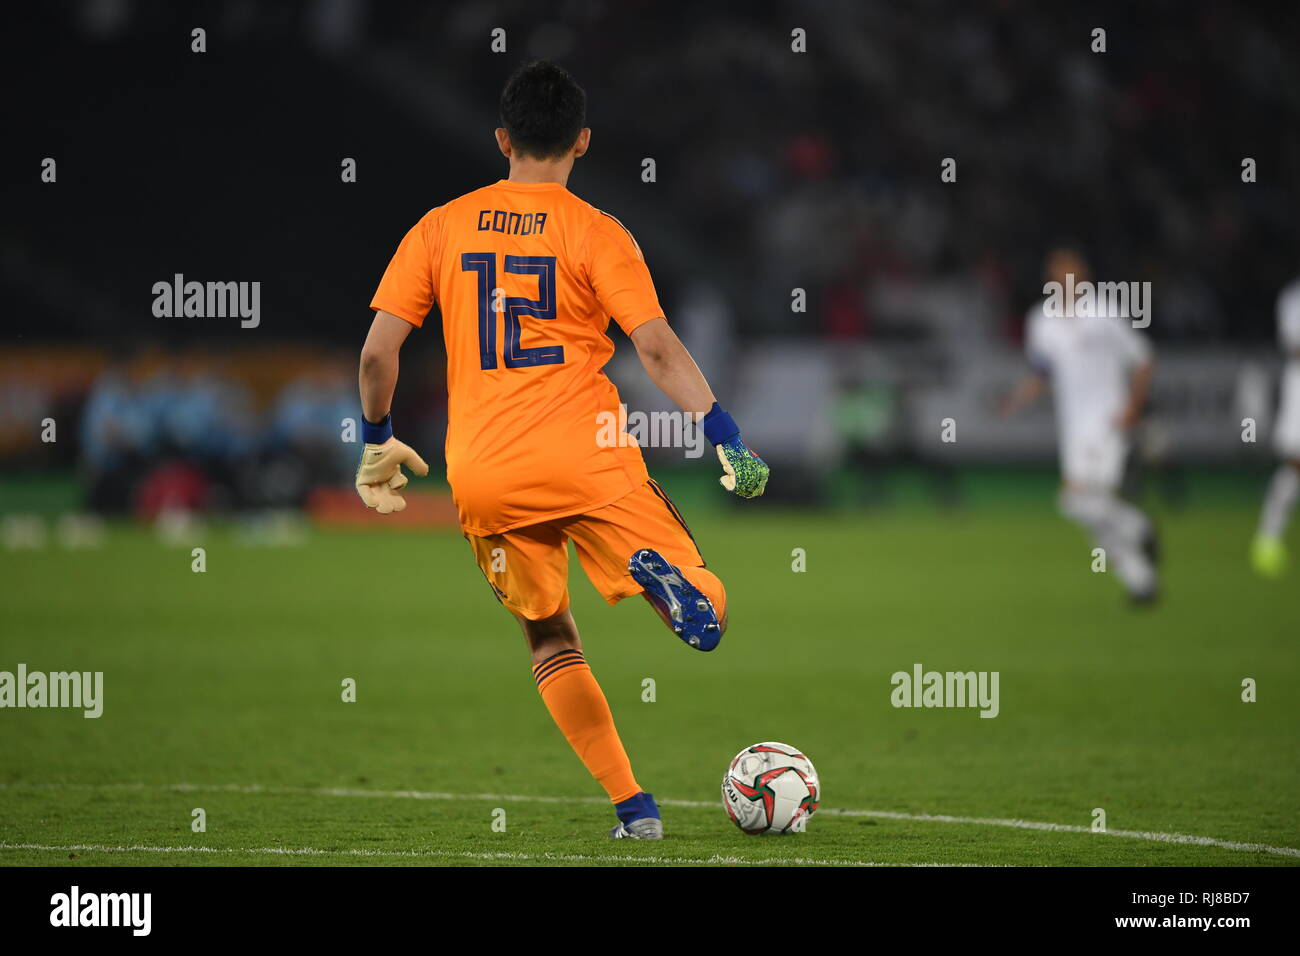 Gonda Shuichi seen in action during the final Asian cup 2019 match between Qatar and Japan at the Zayed sport city stadium. Qatar beat Japan, 3:1 Stock Photo